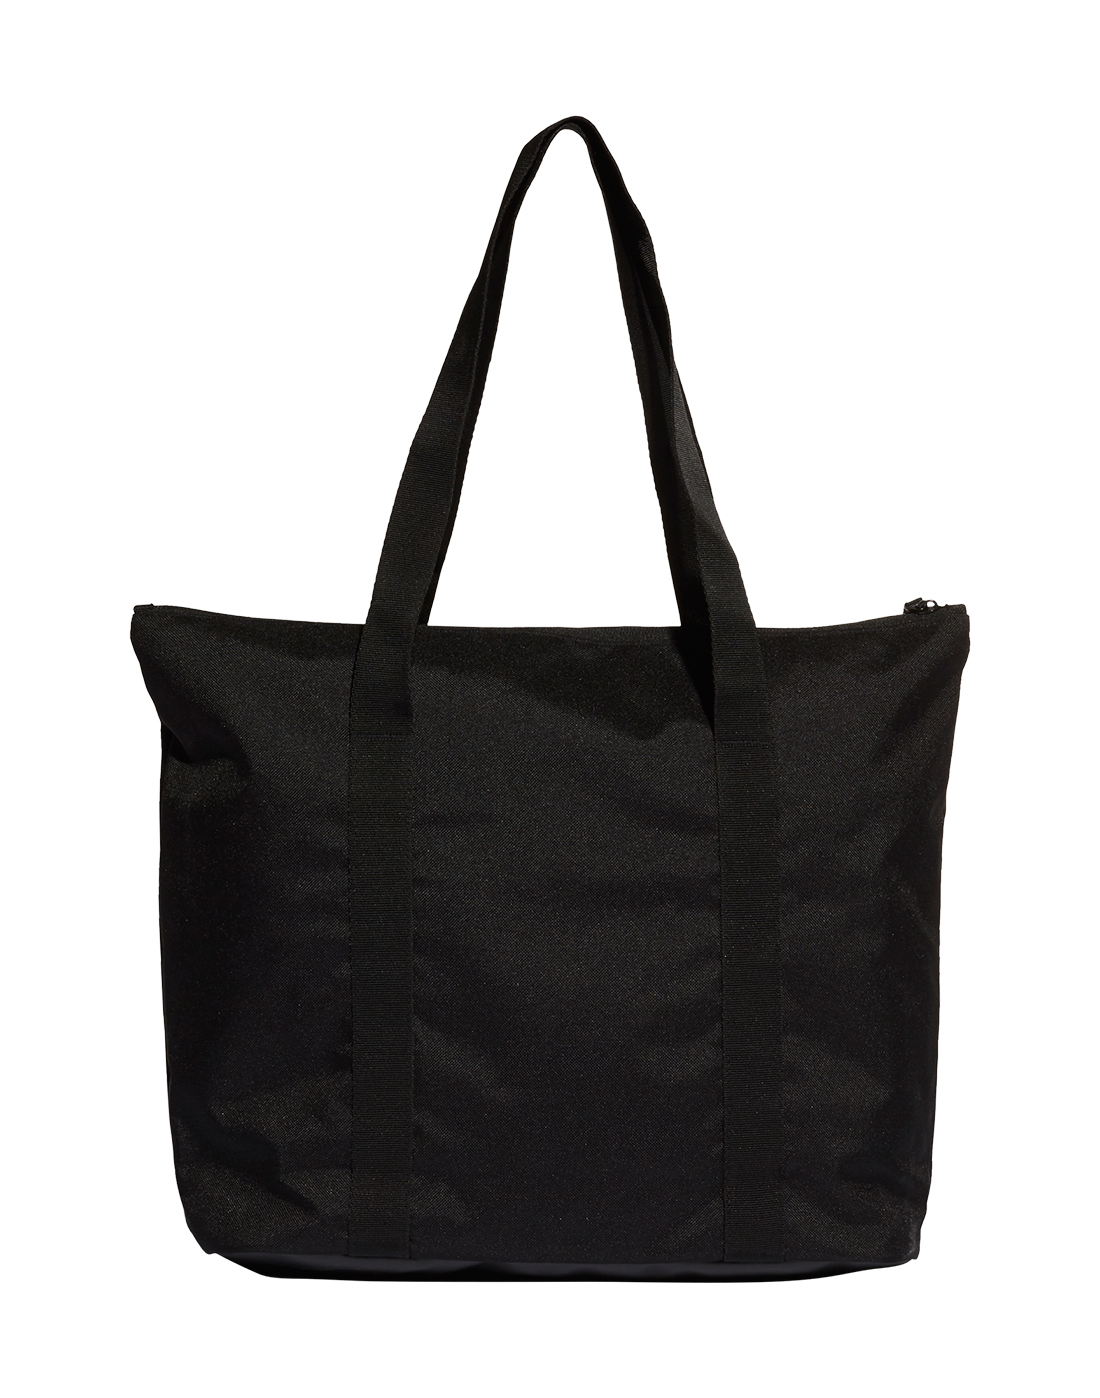 adidas Tote Bag - Black | Life Style Sports IE